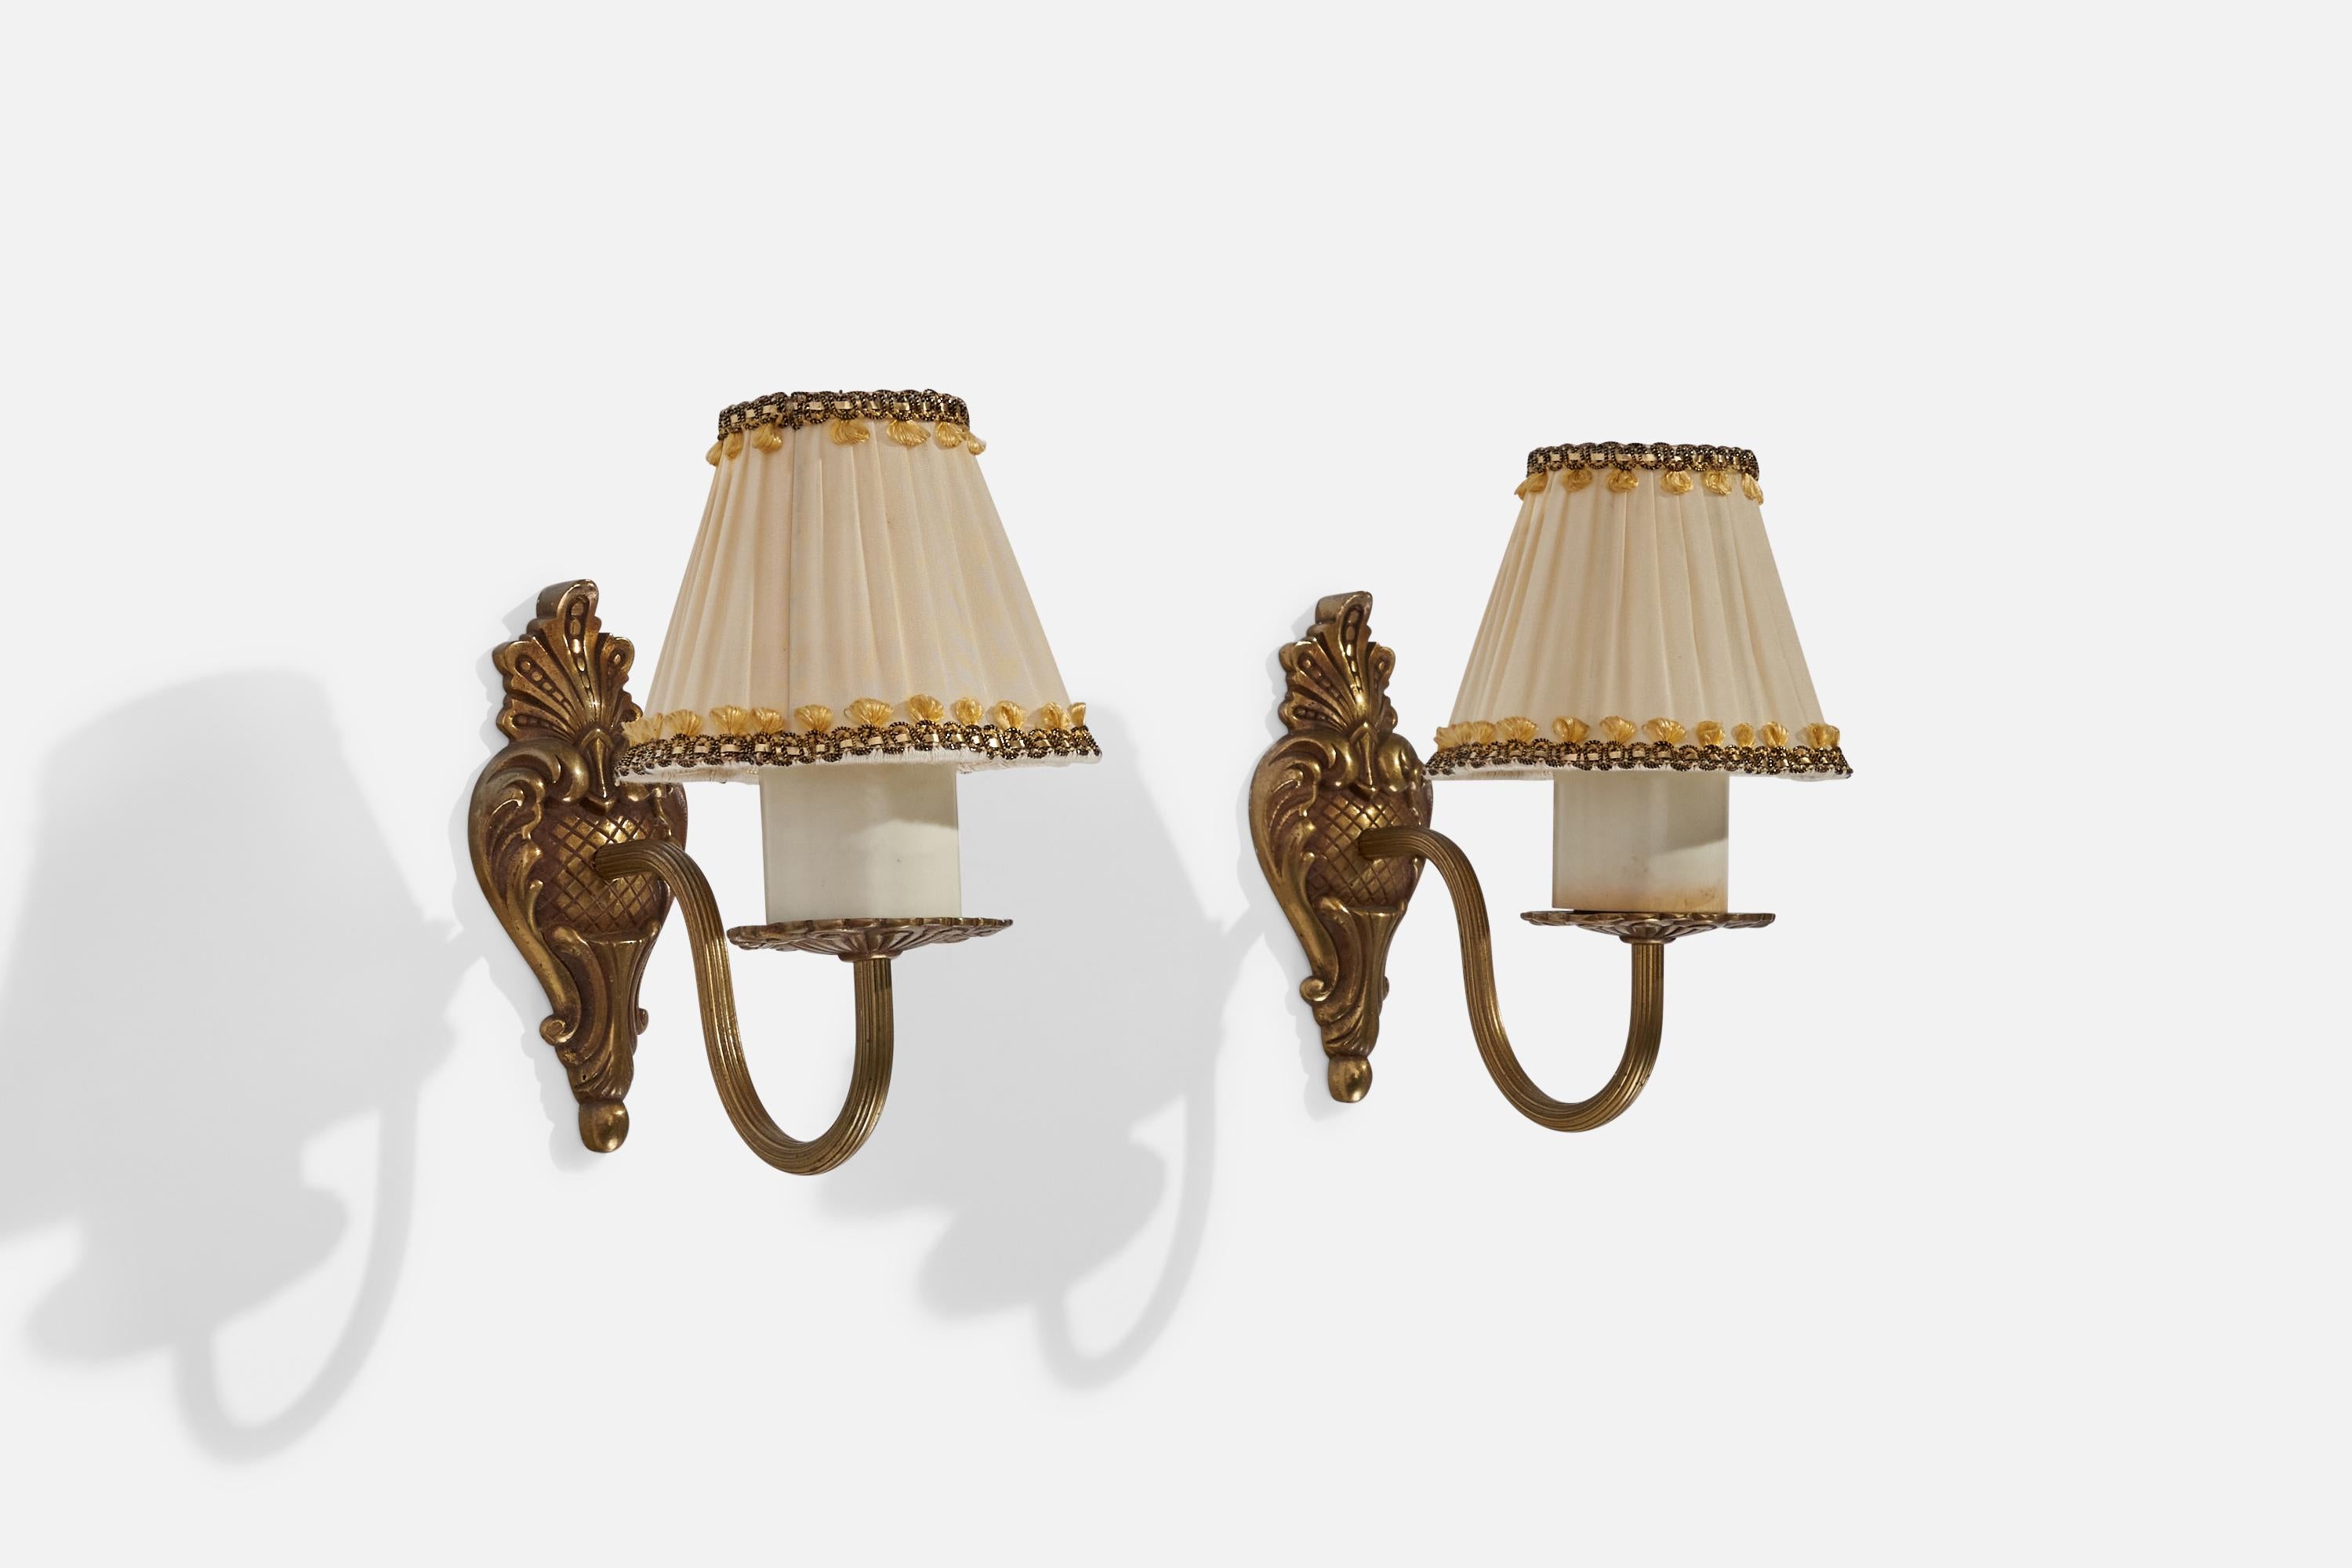 A pair of brass, bakelite and fabric wall lights designed and produced in Sweden, c. 1940s.

Overall Dimensions (inches): 8” H x 4.25” W x 8.25” D
Back Plate Dimensions (inches): N/A
Bulb Specifications: E-26 Bulb
Number of Sockets: 2
All lighting